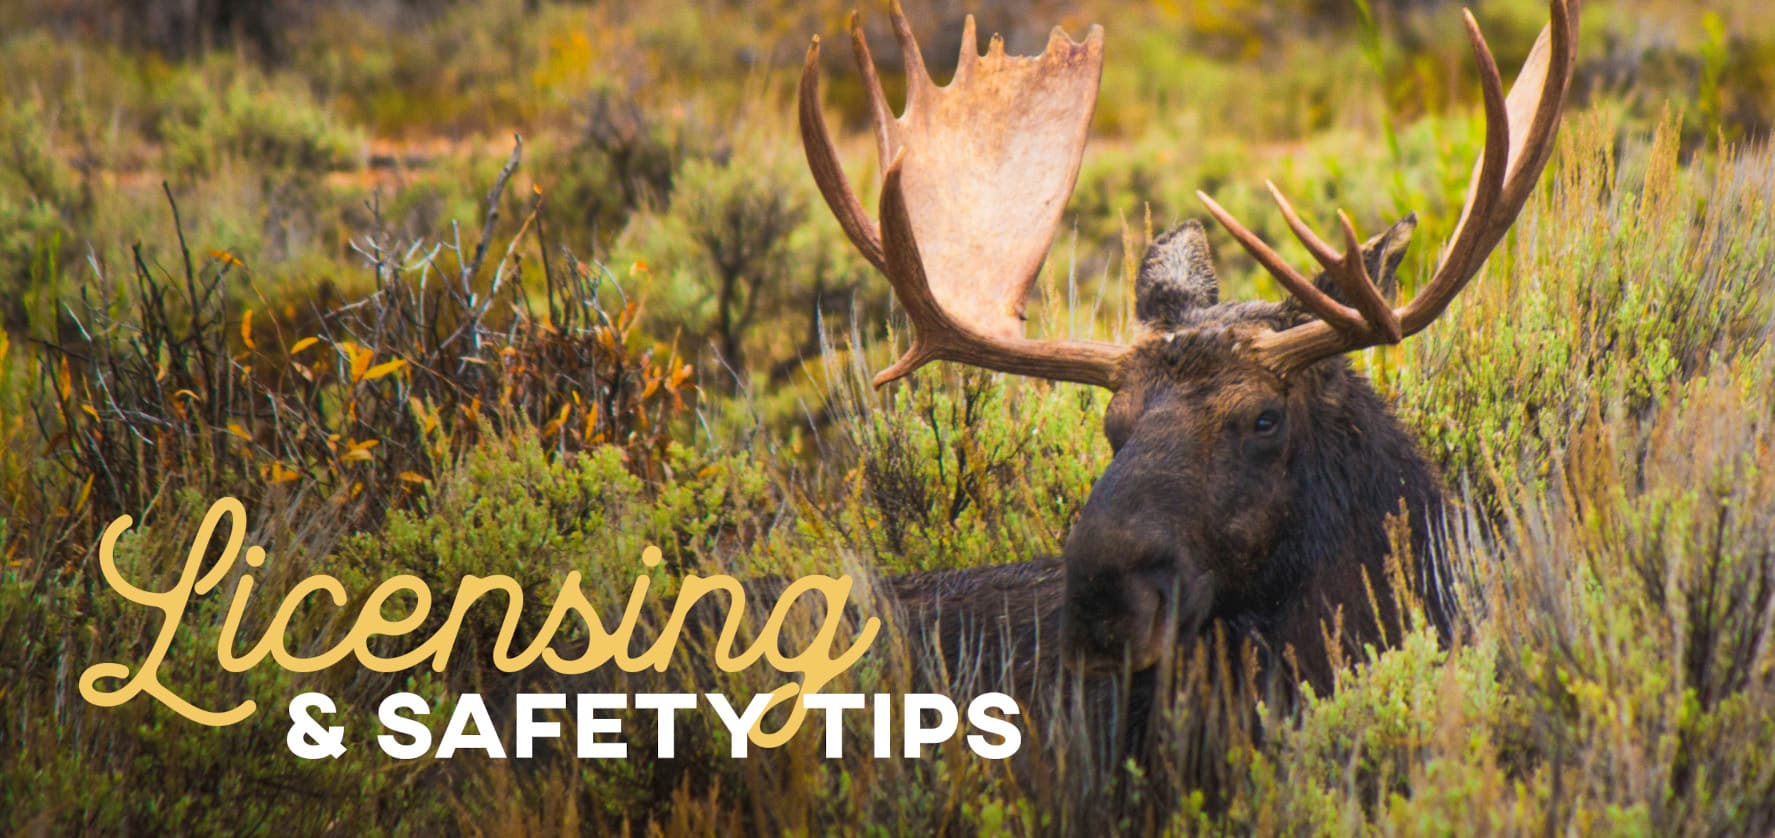 The words Licensing & Safety Tips over a close-up image of a moose standing in tall grass.